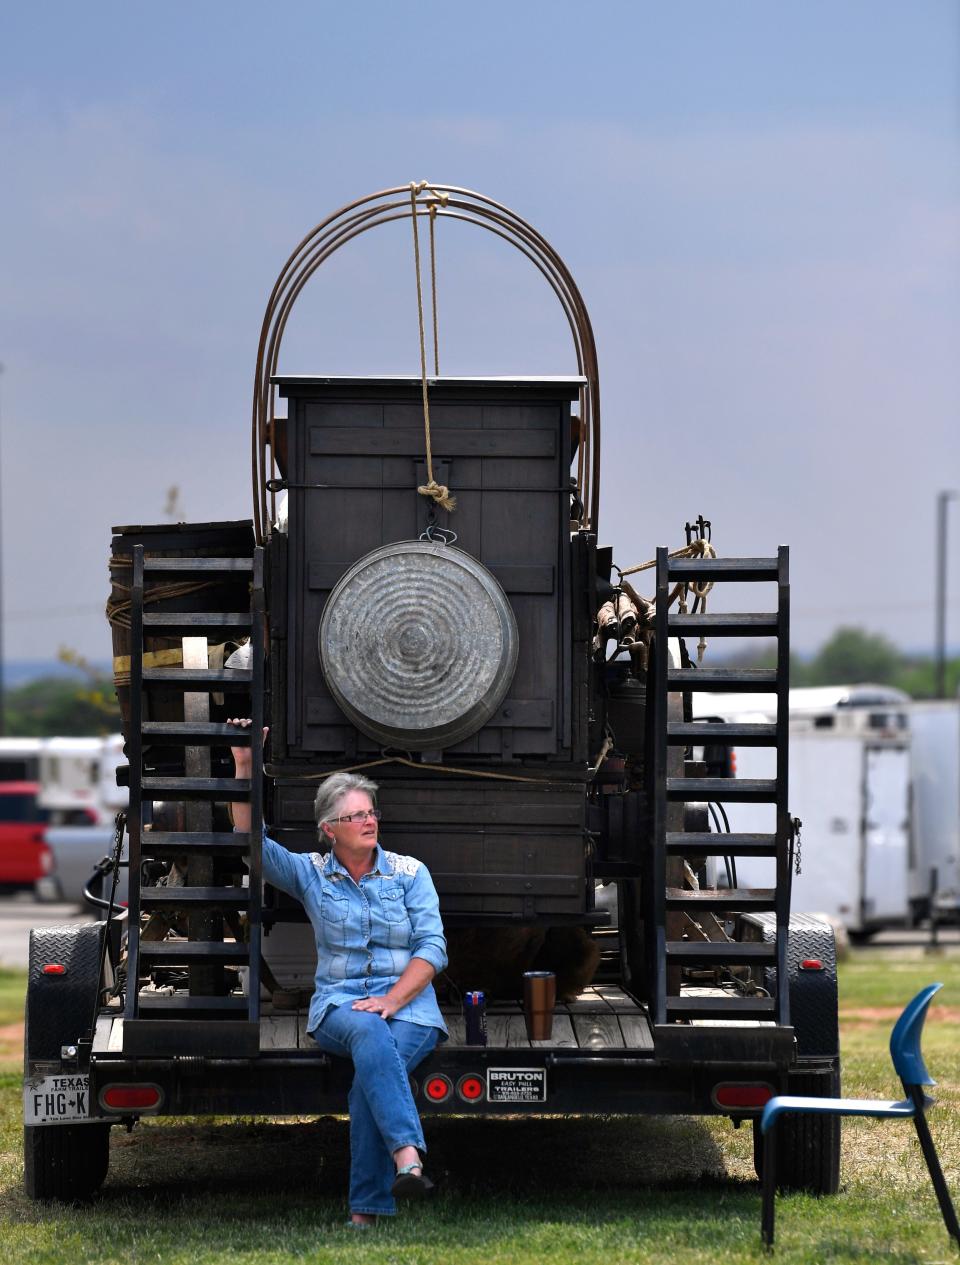 Kathy Bowen of Roscoe takes a rest after participating in the chuckwagon competition with the Scorpion Cattle Company.